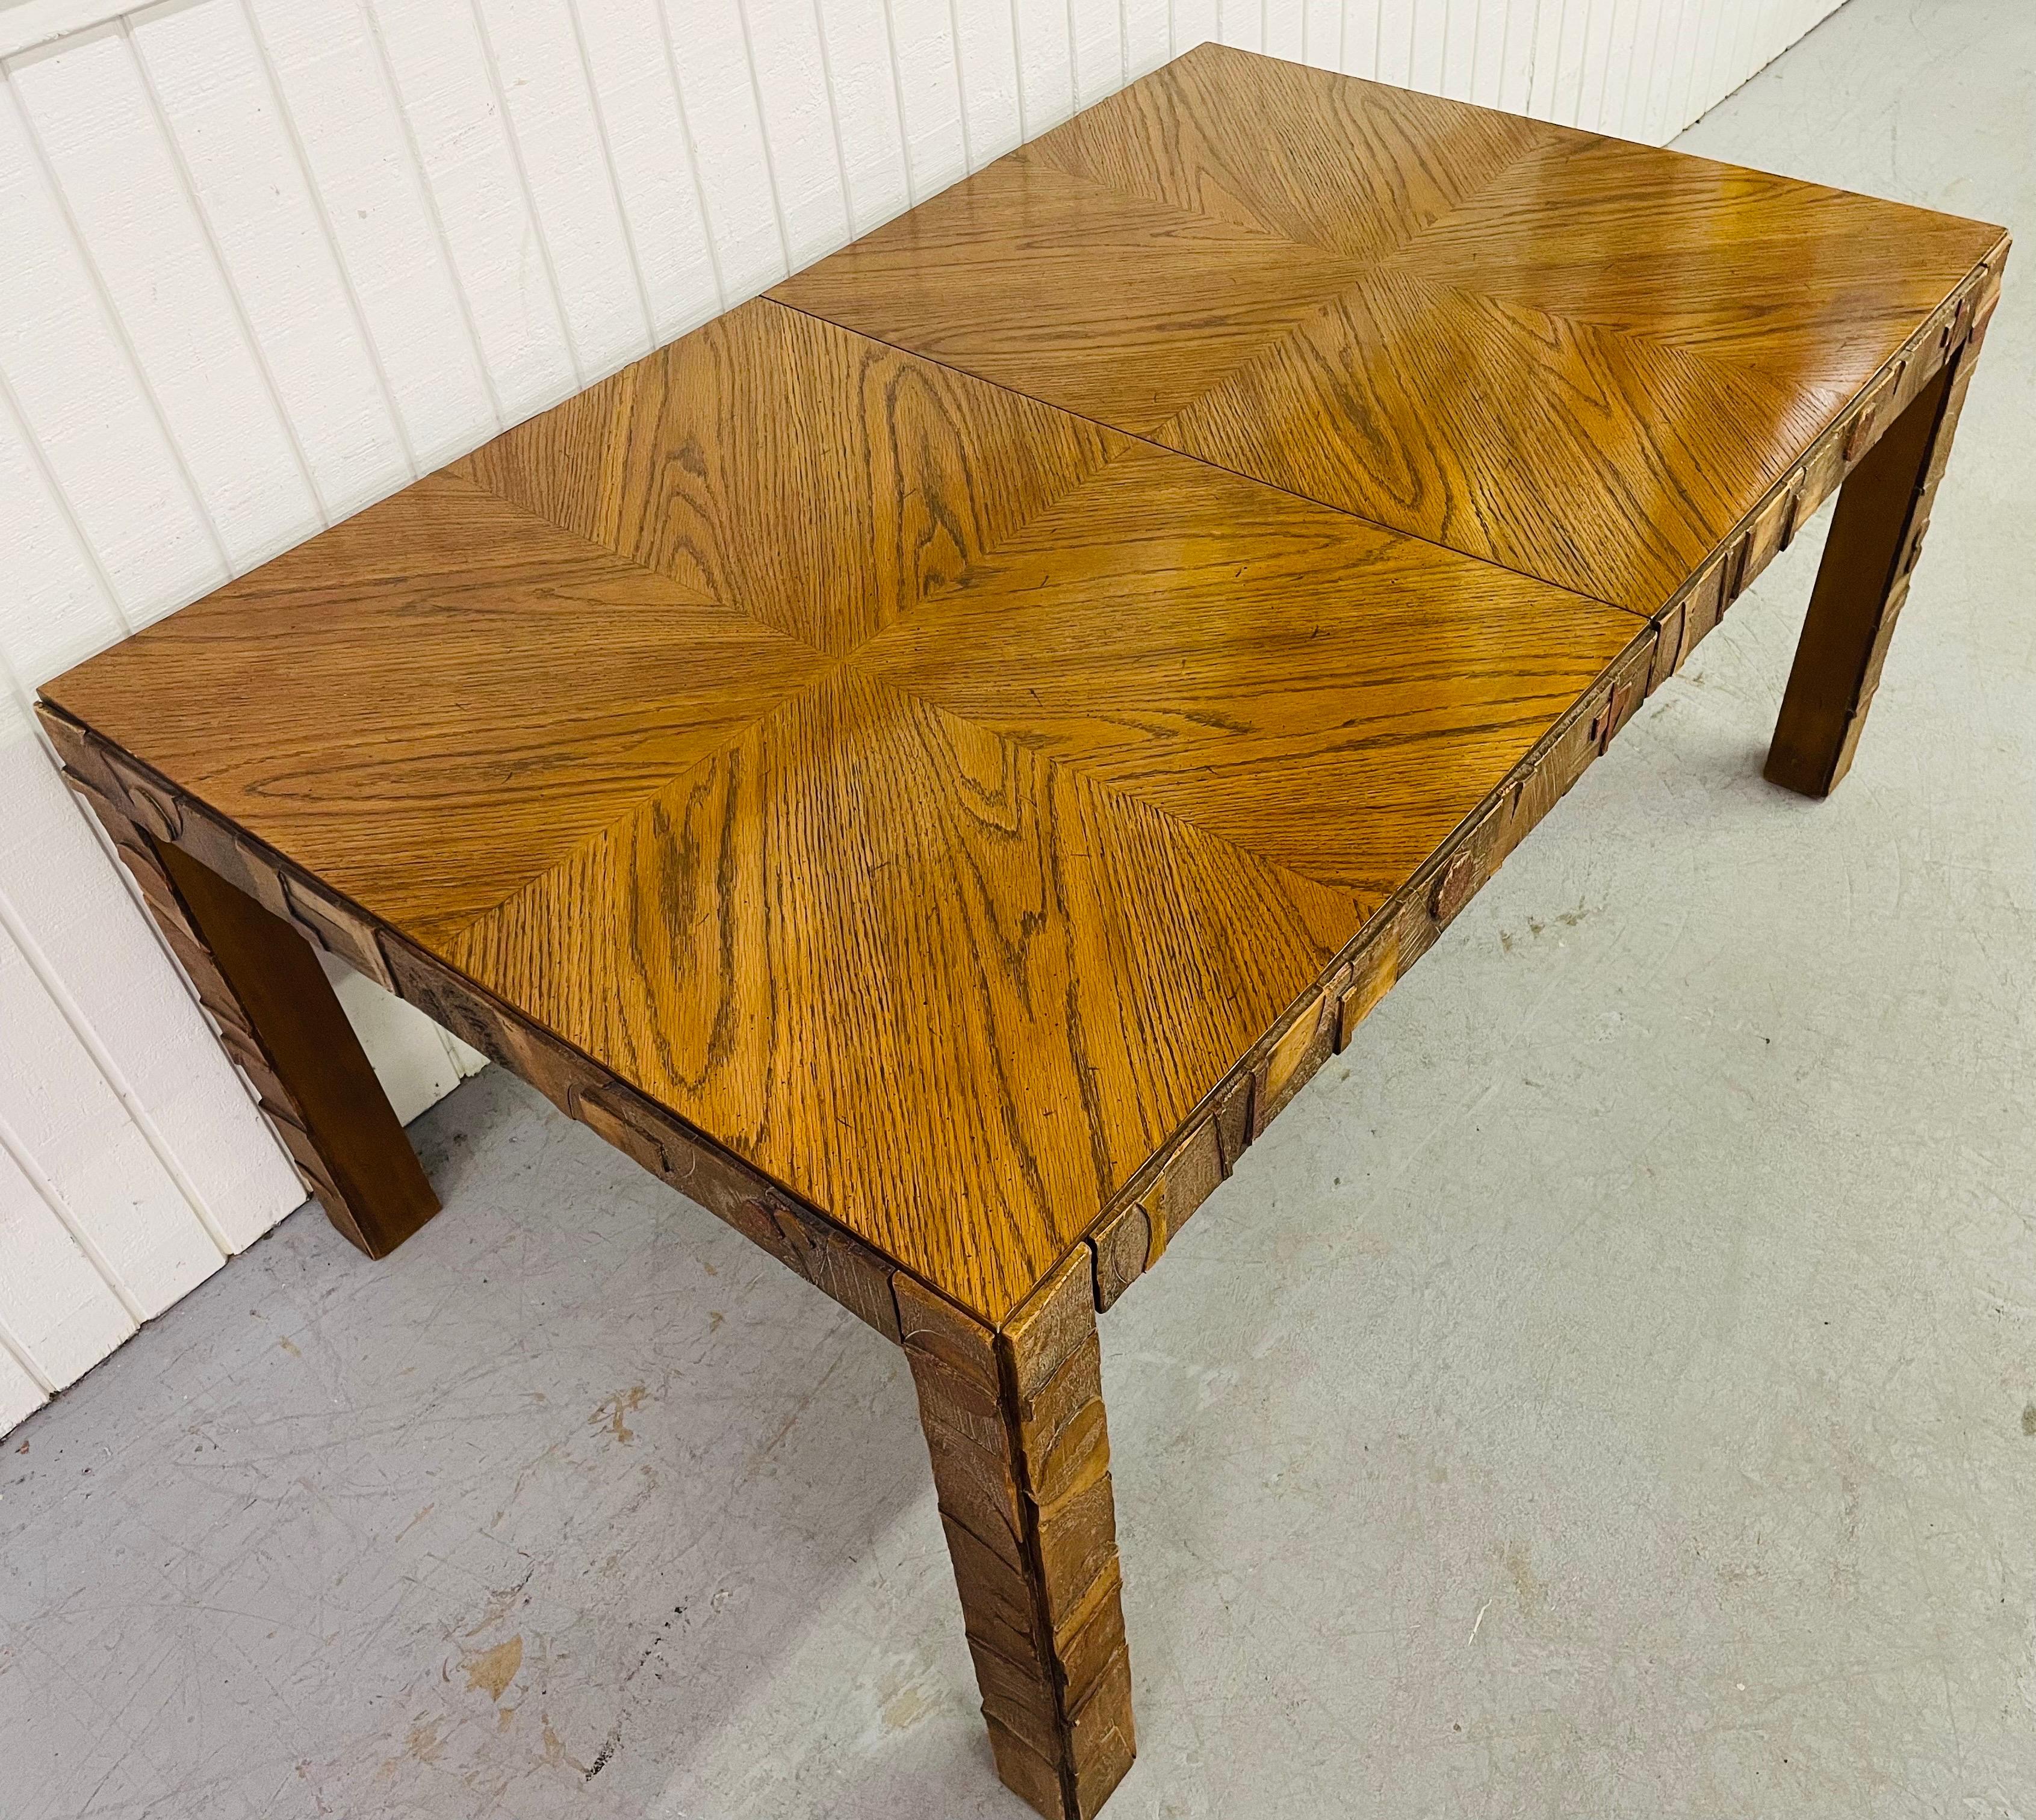 This listing is for a mid-century Lane Pueblo walnut dining table in the style of designer Paul Evans. Featuring an oak rectangular top, walnut finish, and Paul Evans style brutalist designs on the legs.

Extends up to 82.75” L with table leaf.